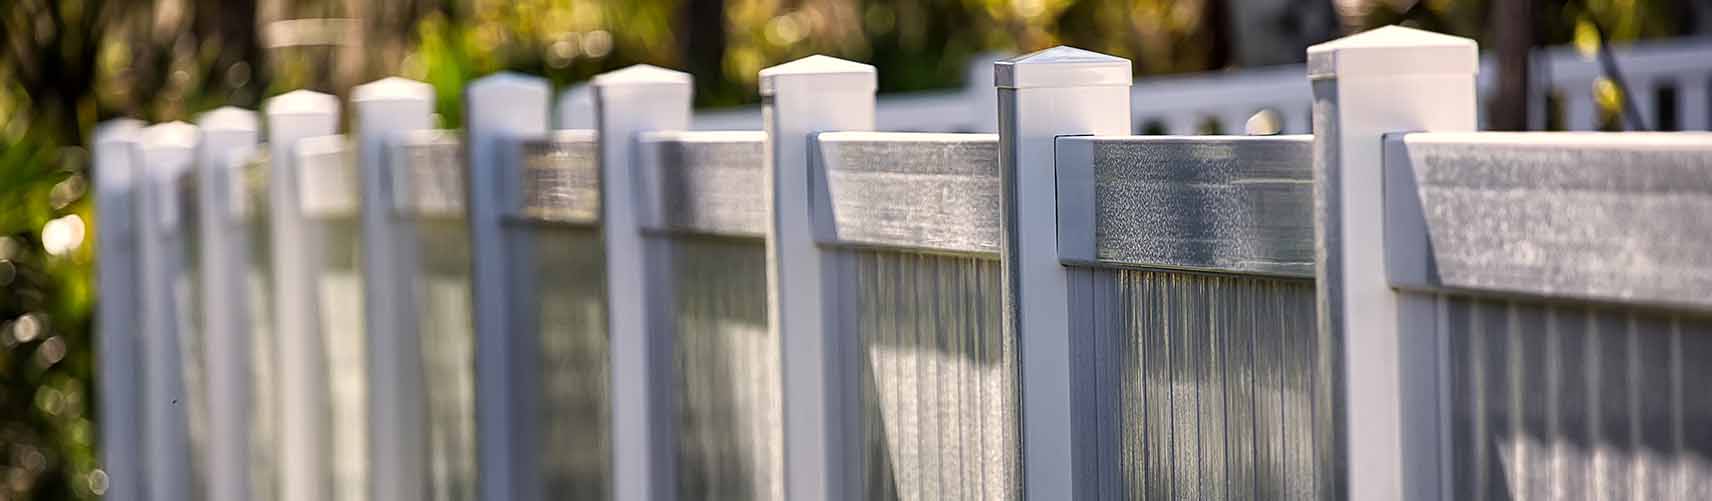 Belleview Fencing Contractor, Landscaping Company and Fence Installation